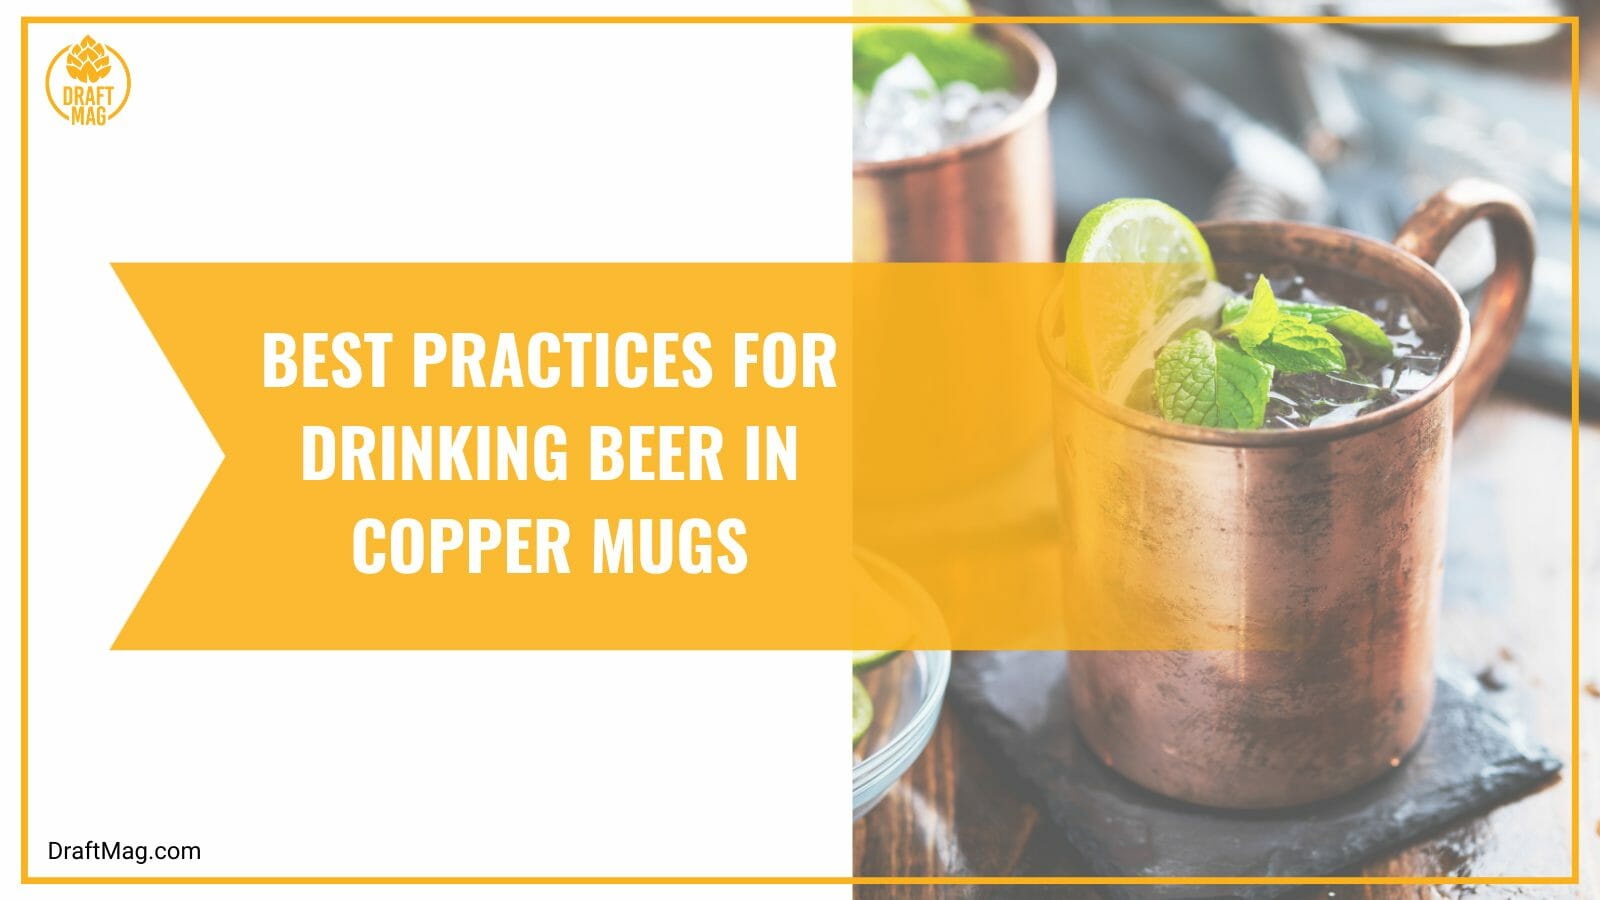 Drinking in copper mugs best practices